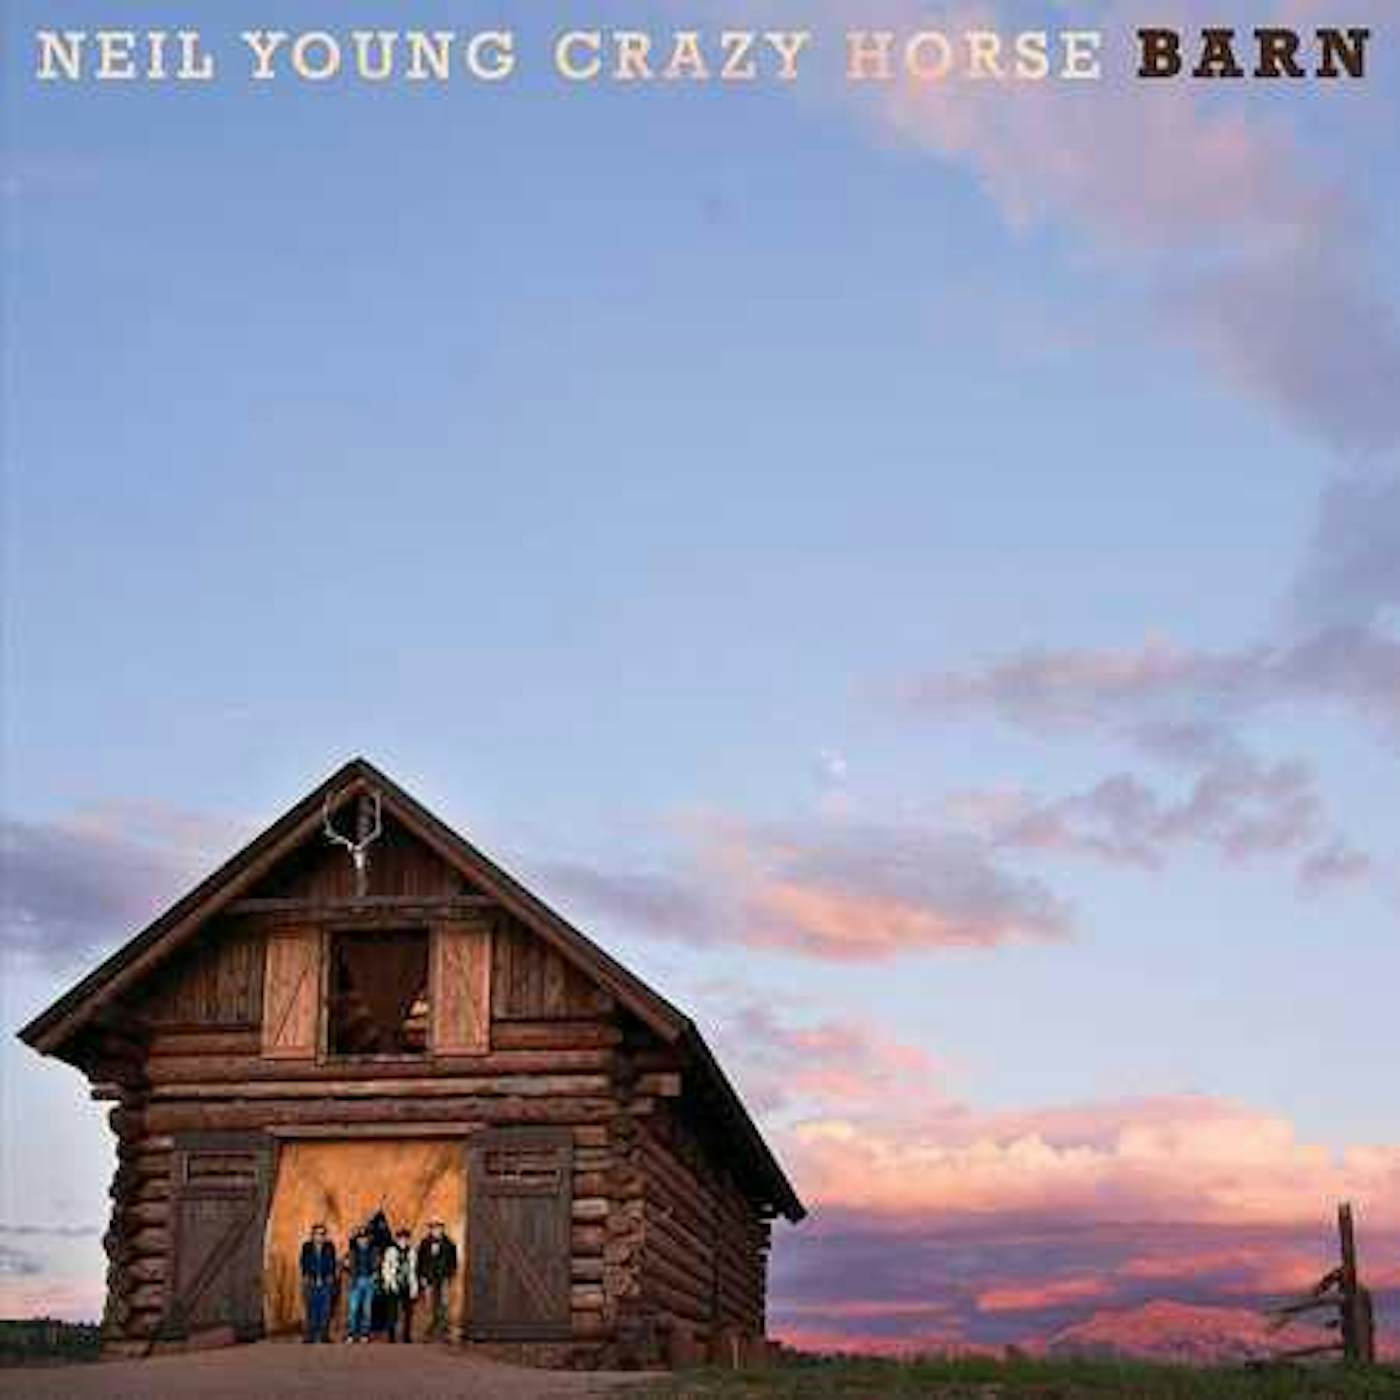 Neil Young & Crazy Horse BARN (Deluxe Edition) Vinyl Record